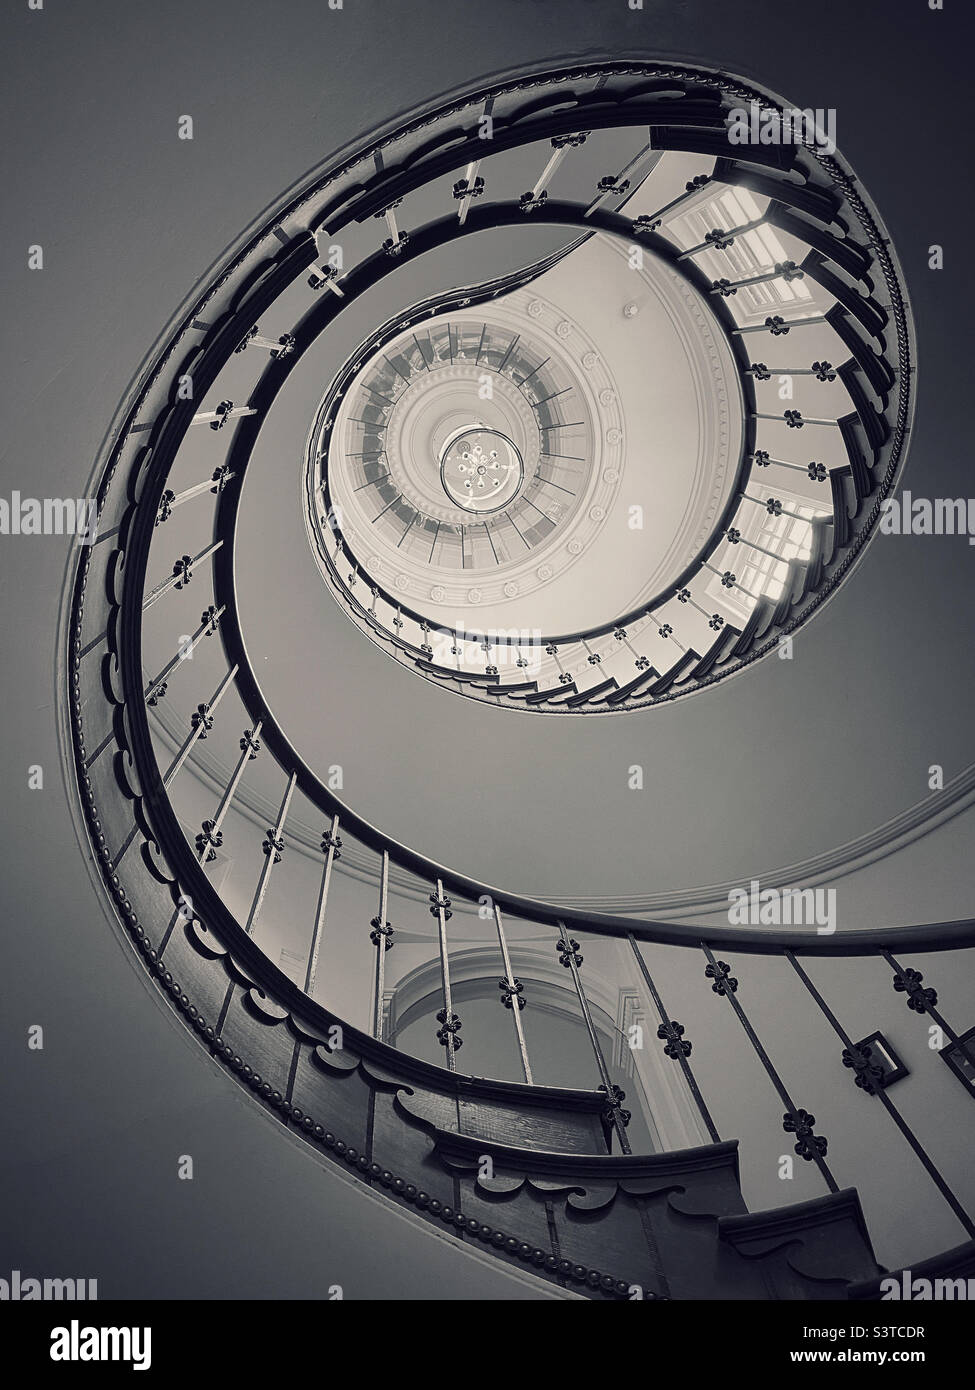 The view from the bottom of a spiral staircase, looking up. There’s something satisfying about geometric shapes! Photo ©️ COLIN HOSKINS. Stock Photo